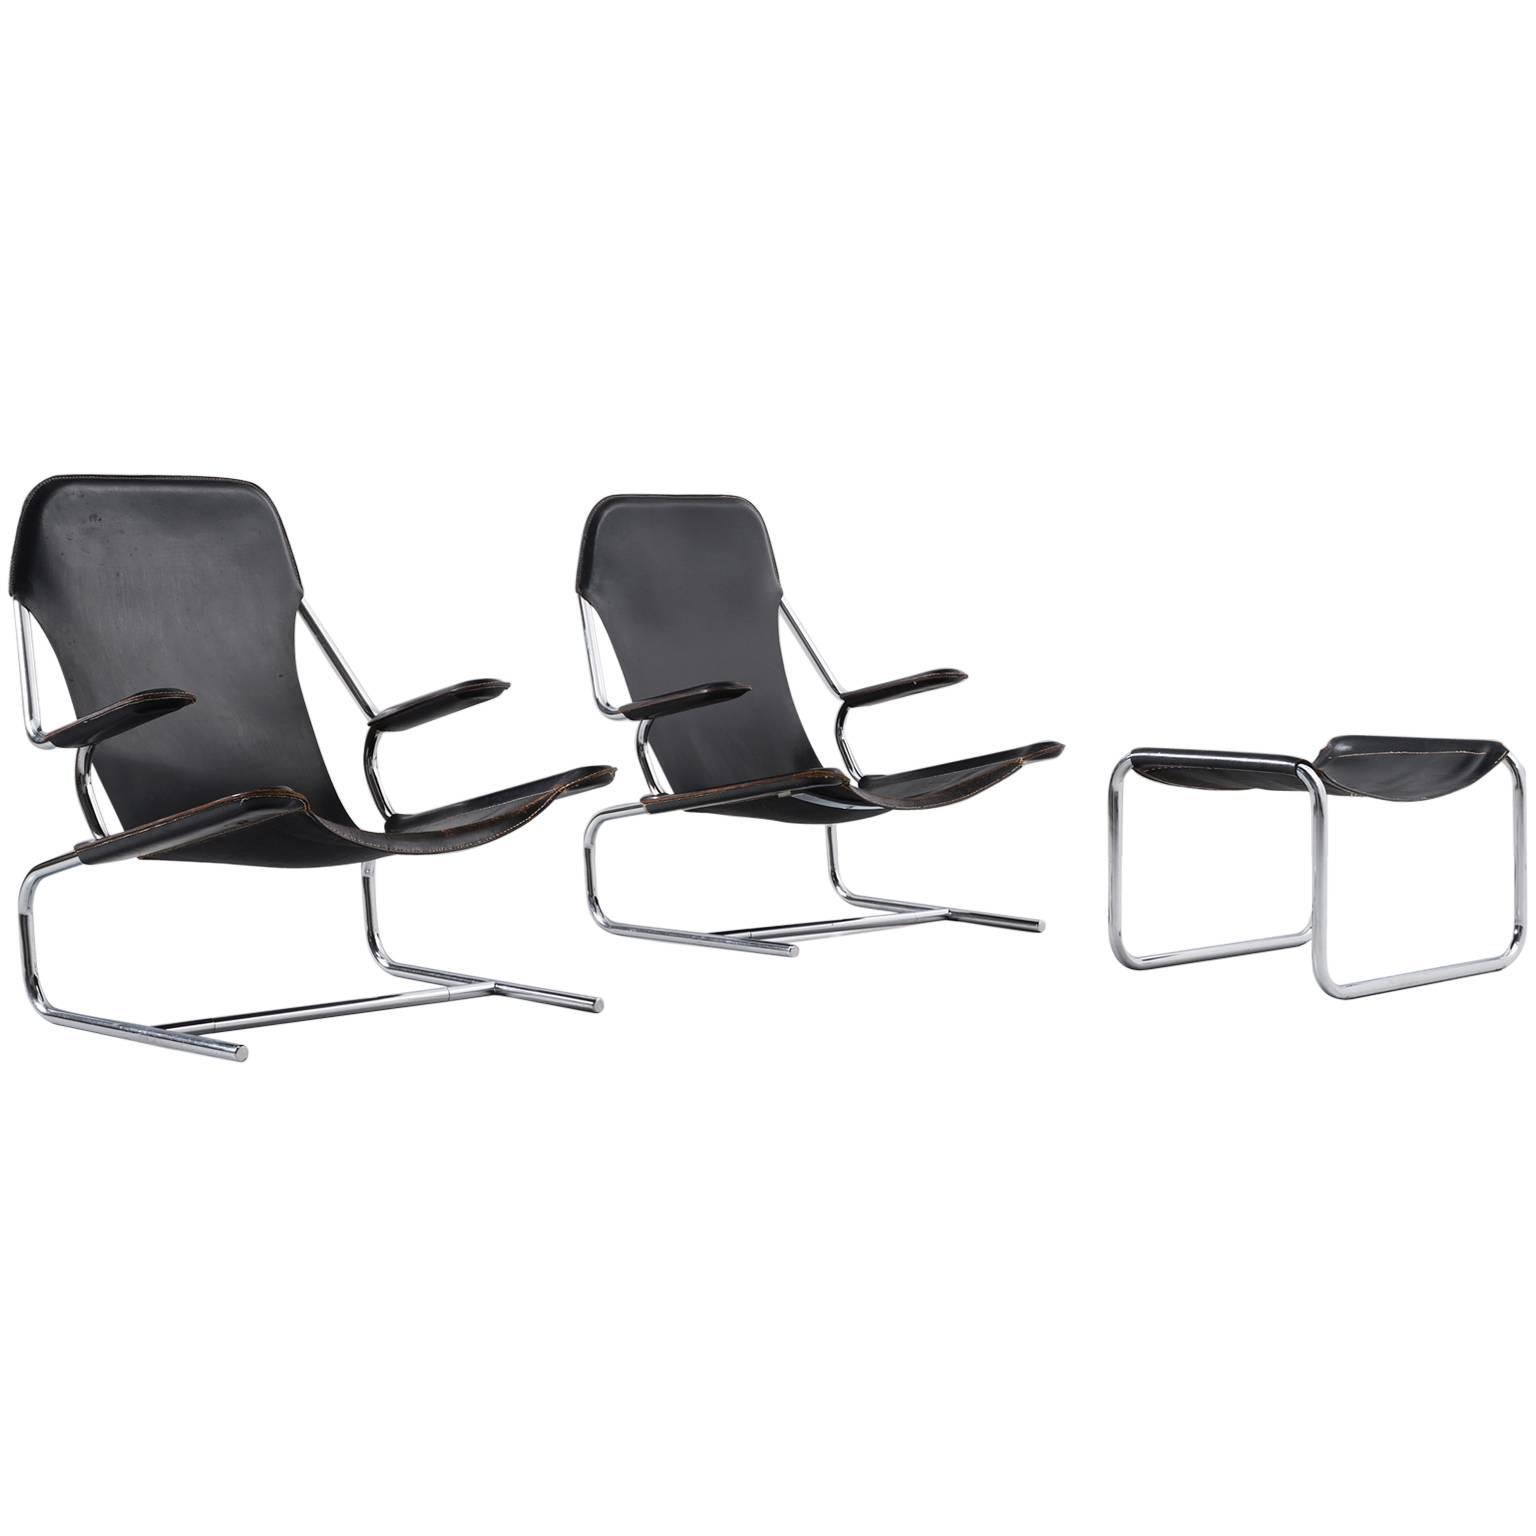 Pair of Tubular Lounge Chairs and Ottoman in Black Leather Upholstery